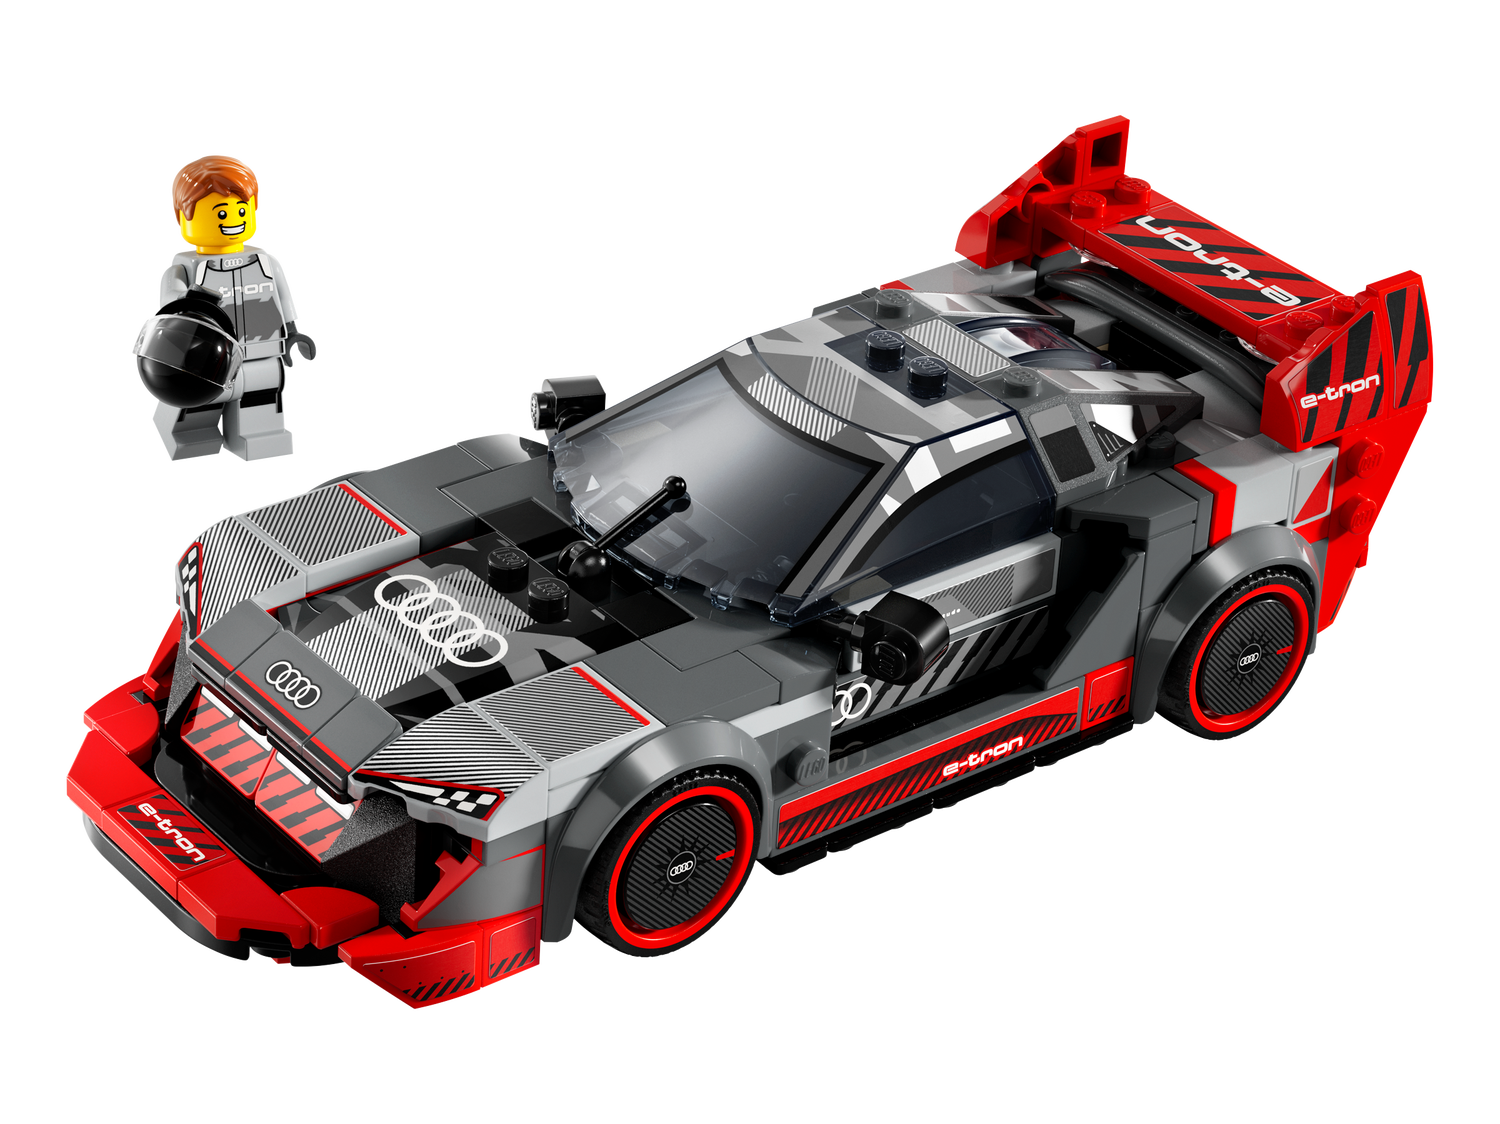 Audi S1 e-tron quattro Race Car 76921 | Speed Champions | Buy online at the  Official LEGO® Shop US